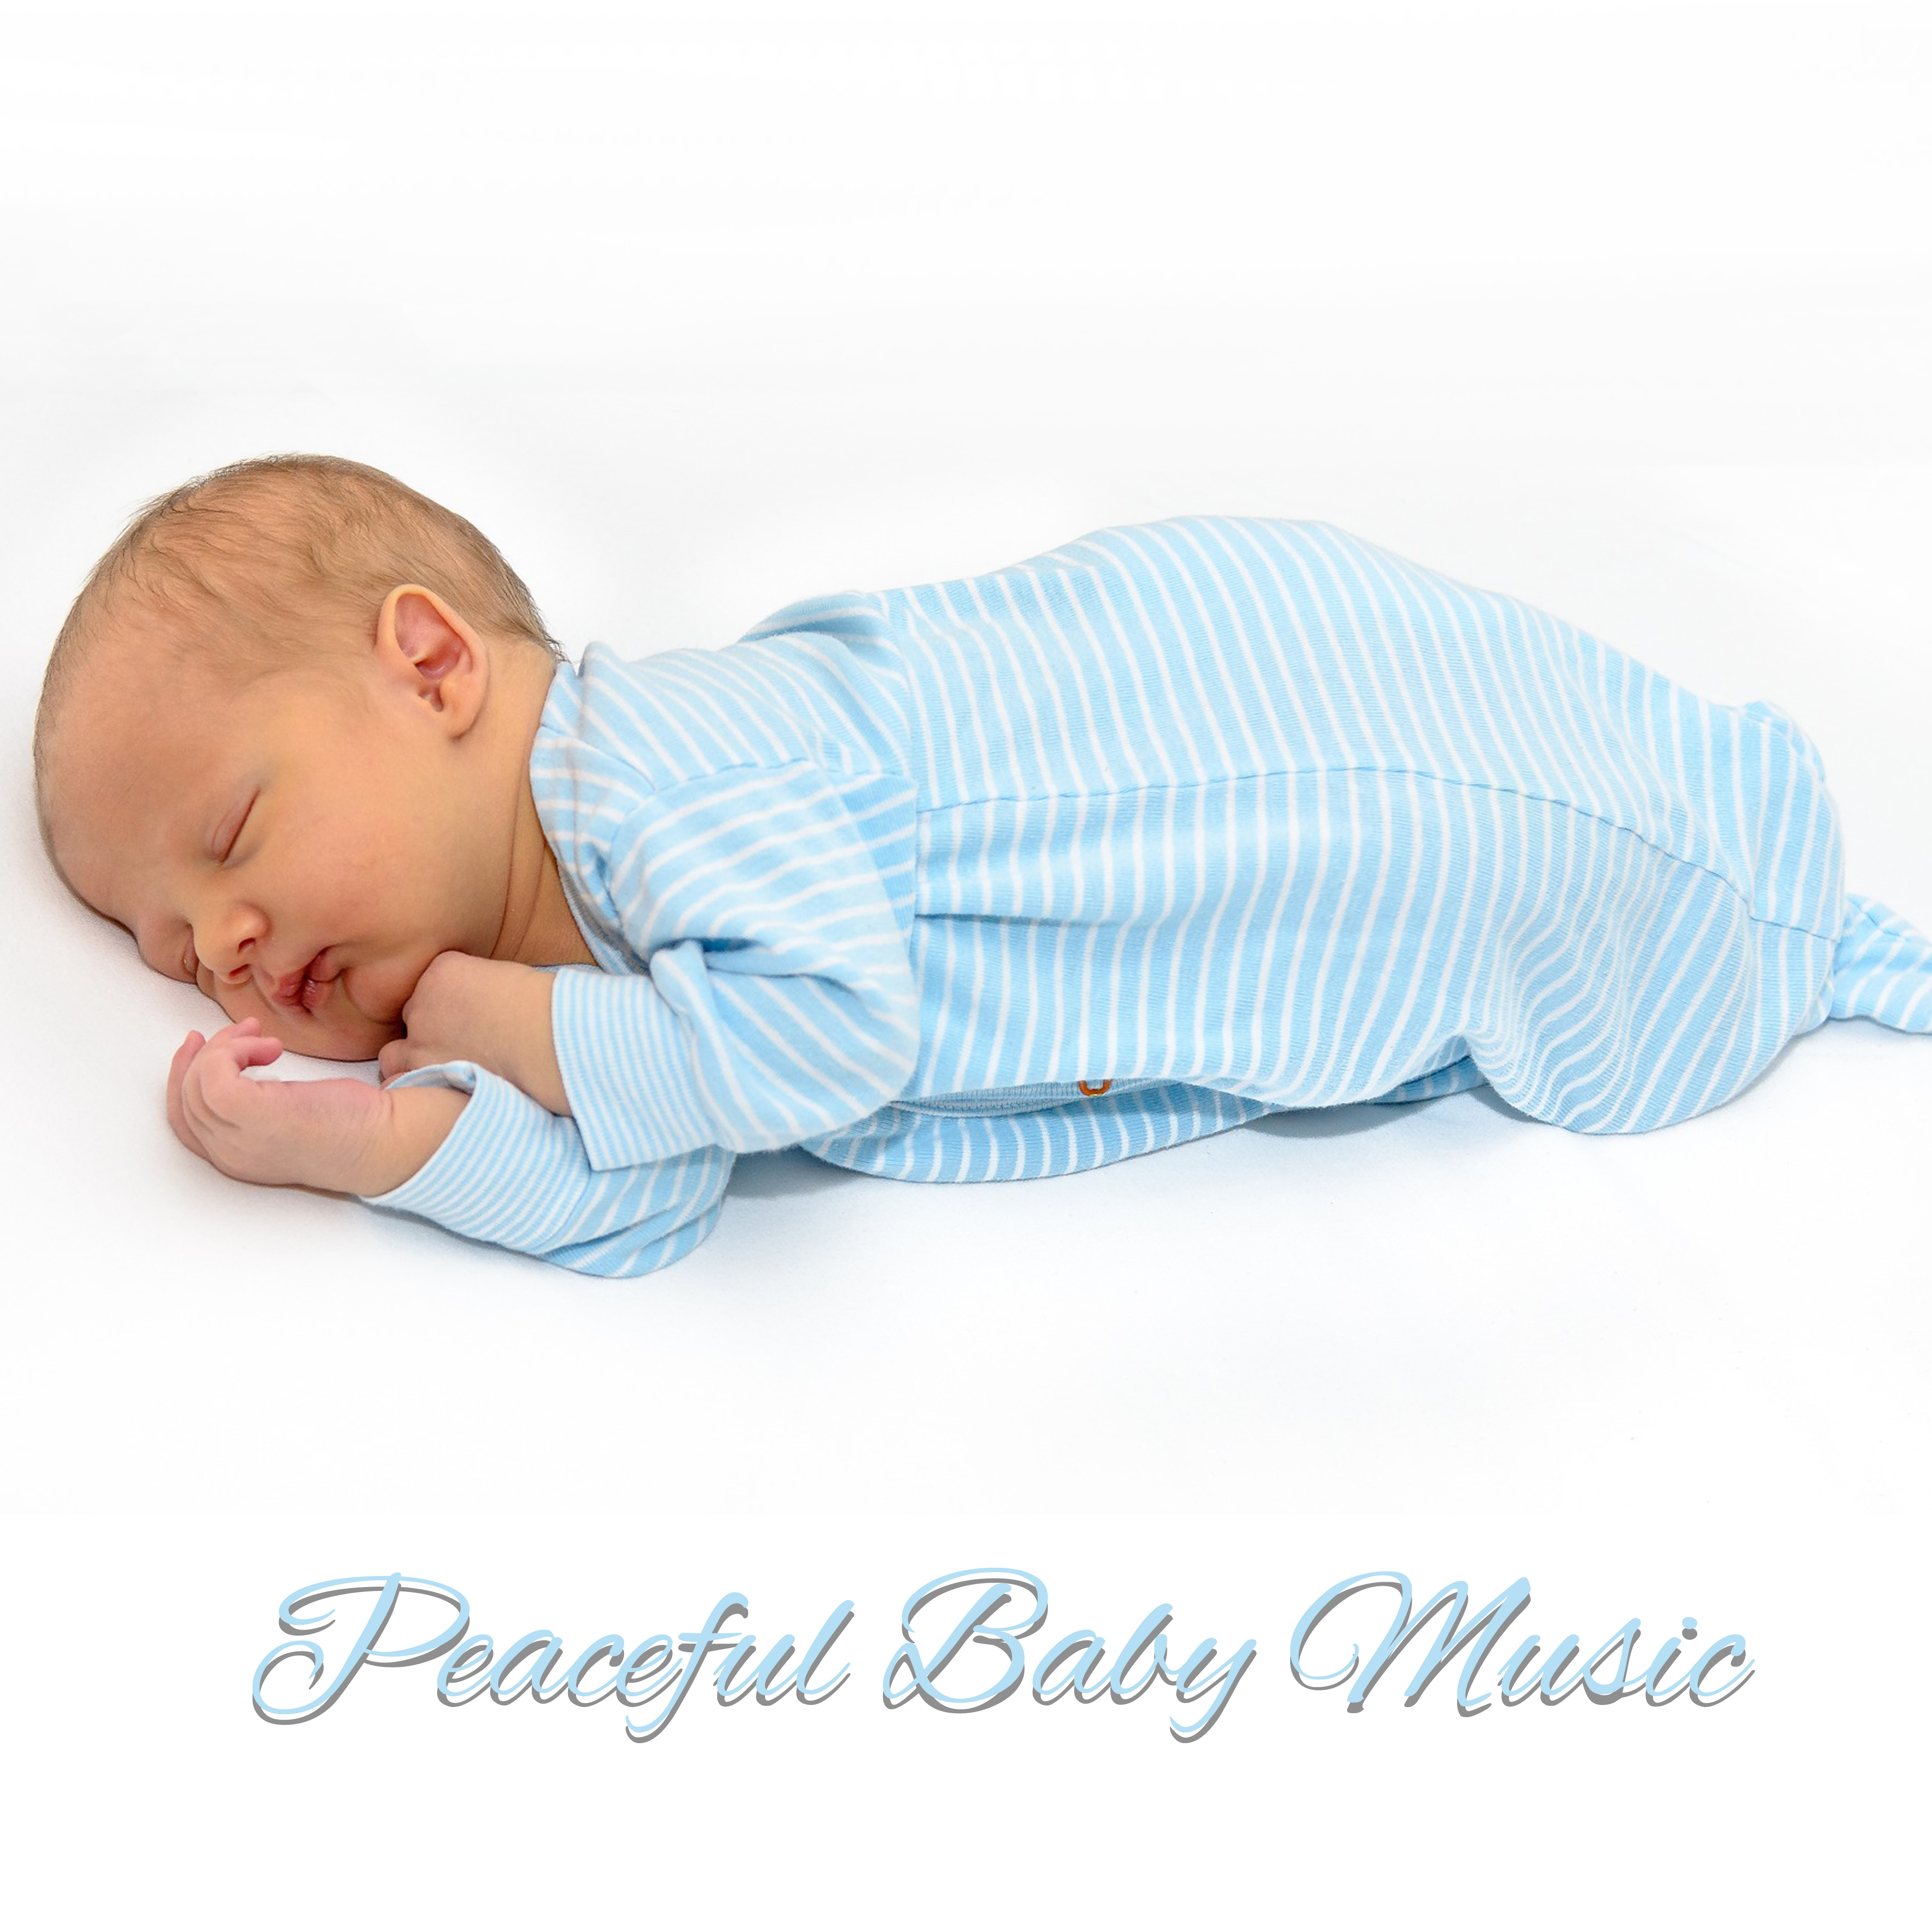 Peaceful Baby Music  Music for Baby, Lullabies, Relaxing Music for Babies, White Noise for Baby Sleep, New Age 2017